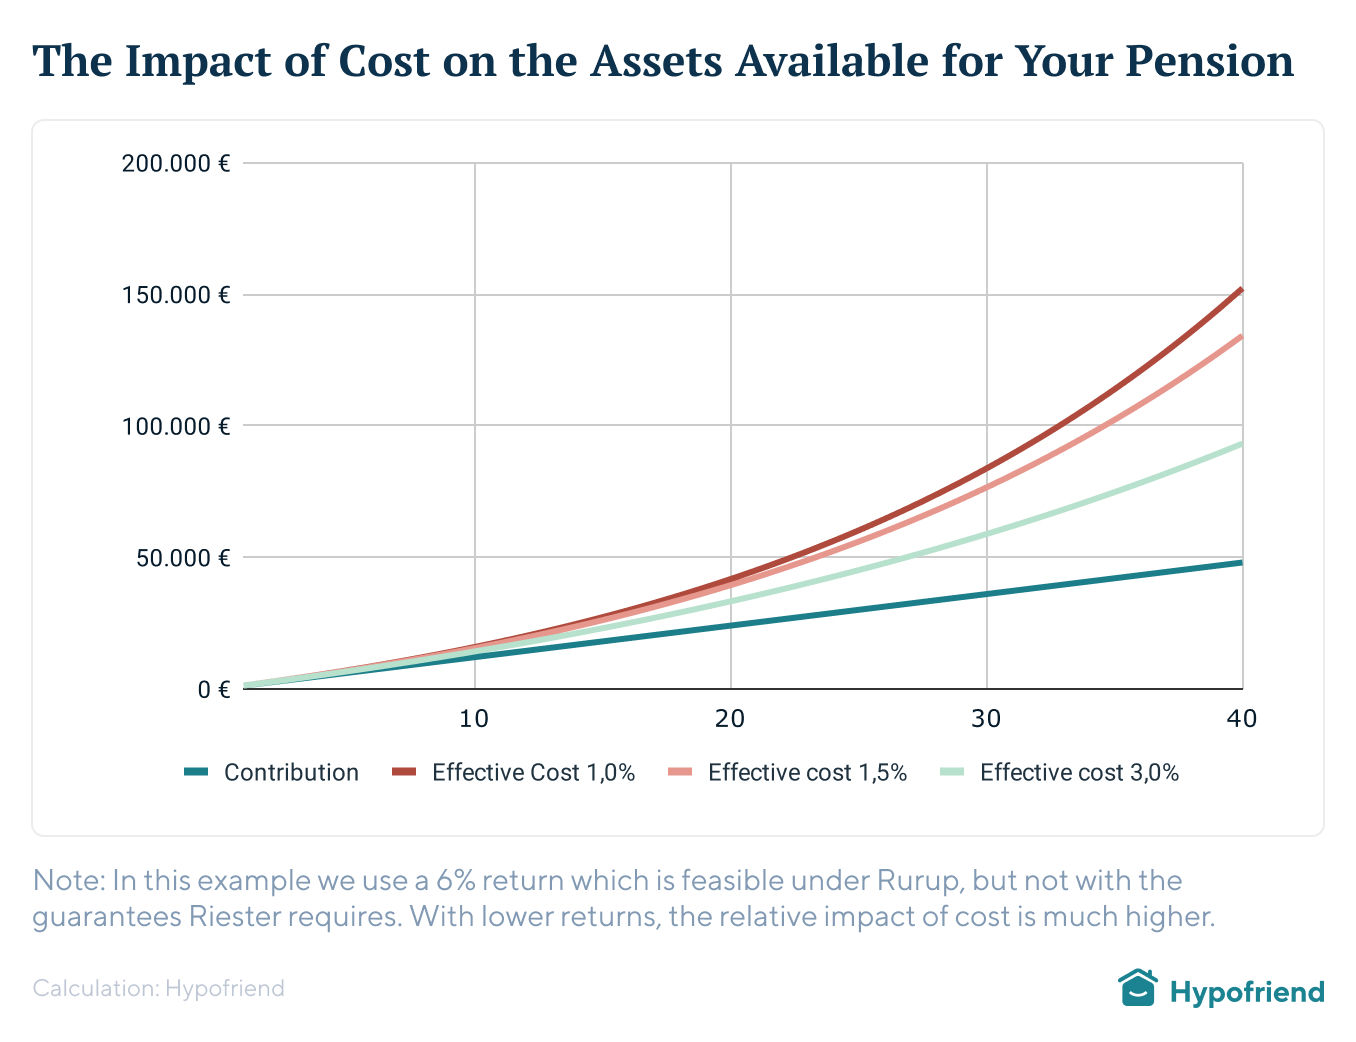 impact-of-cost-on-available-assets-for-pension@2x